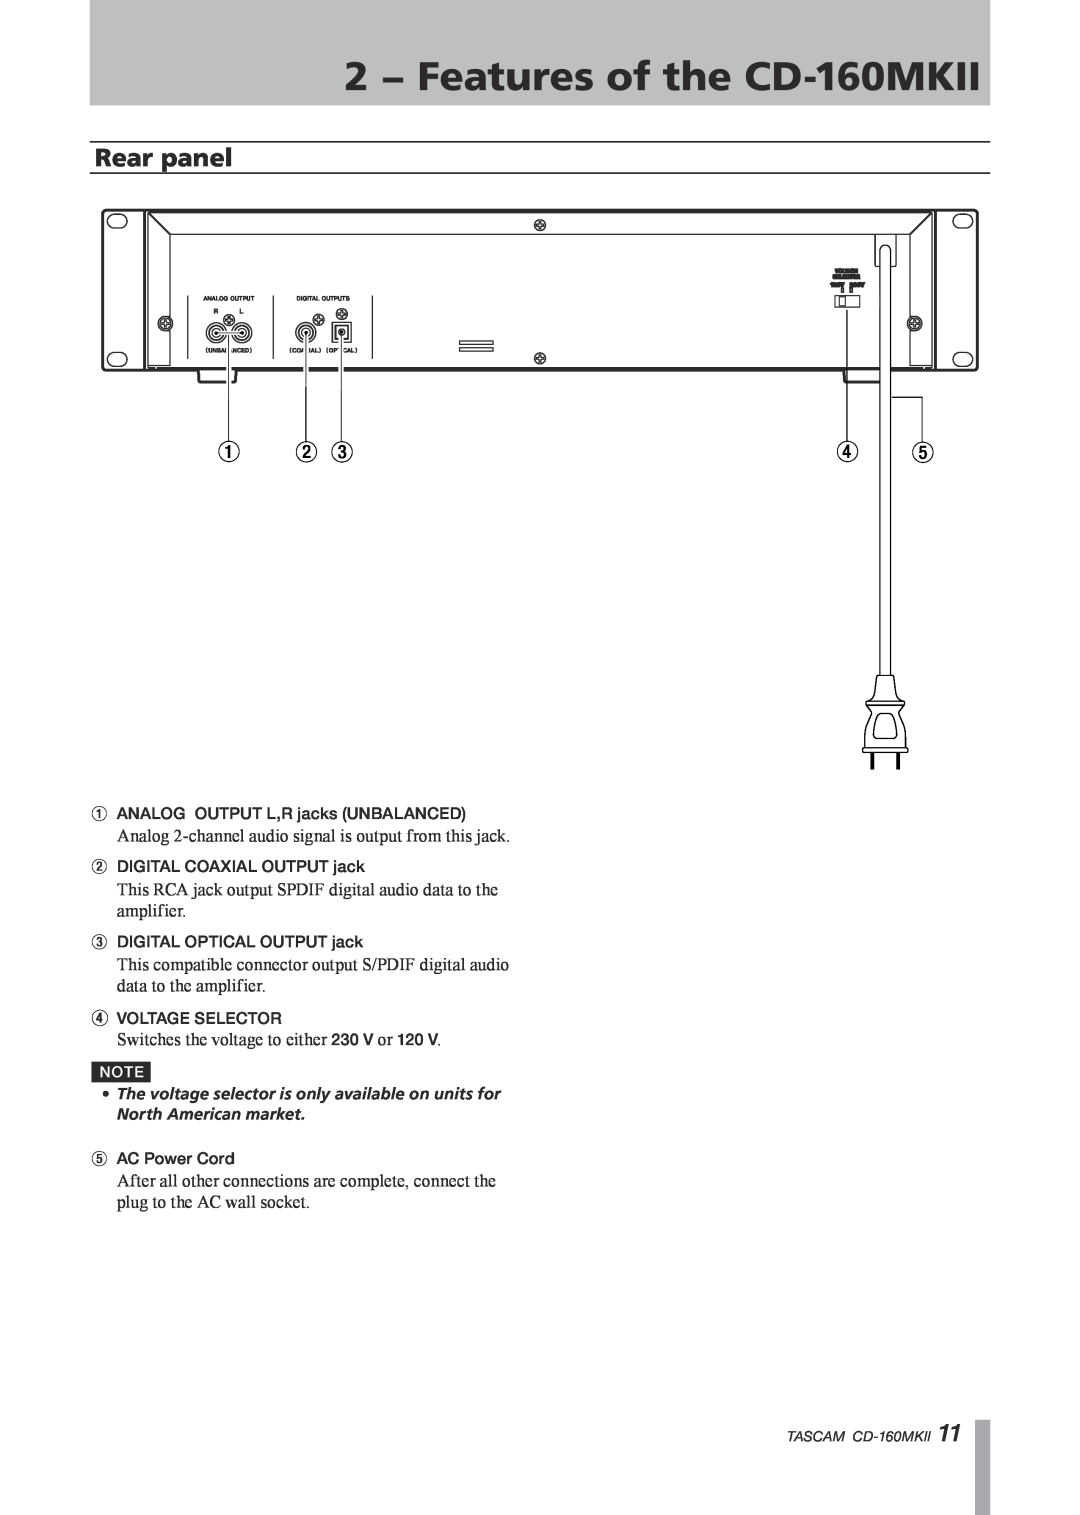 Tascam owner manual Rear panel, 2 − Features of the CD-160MKII 